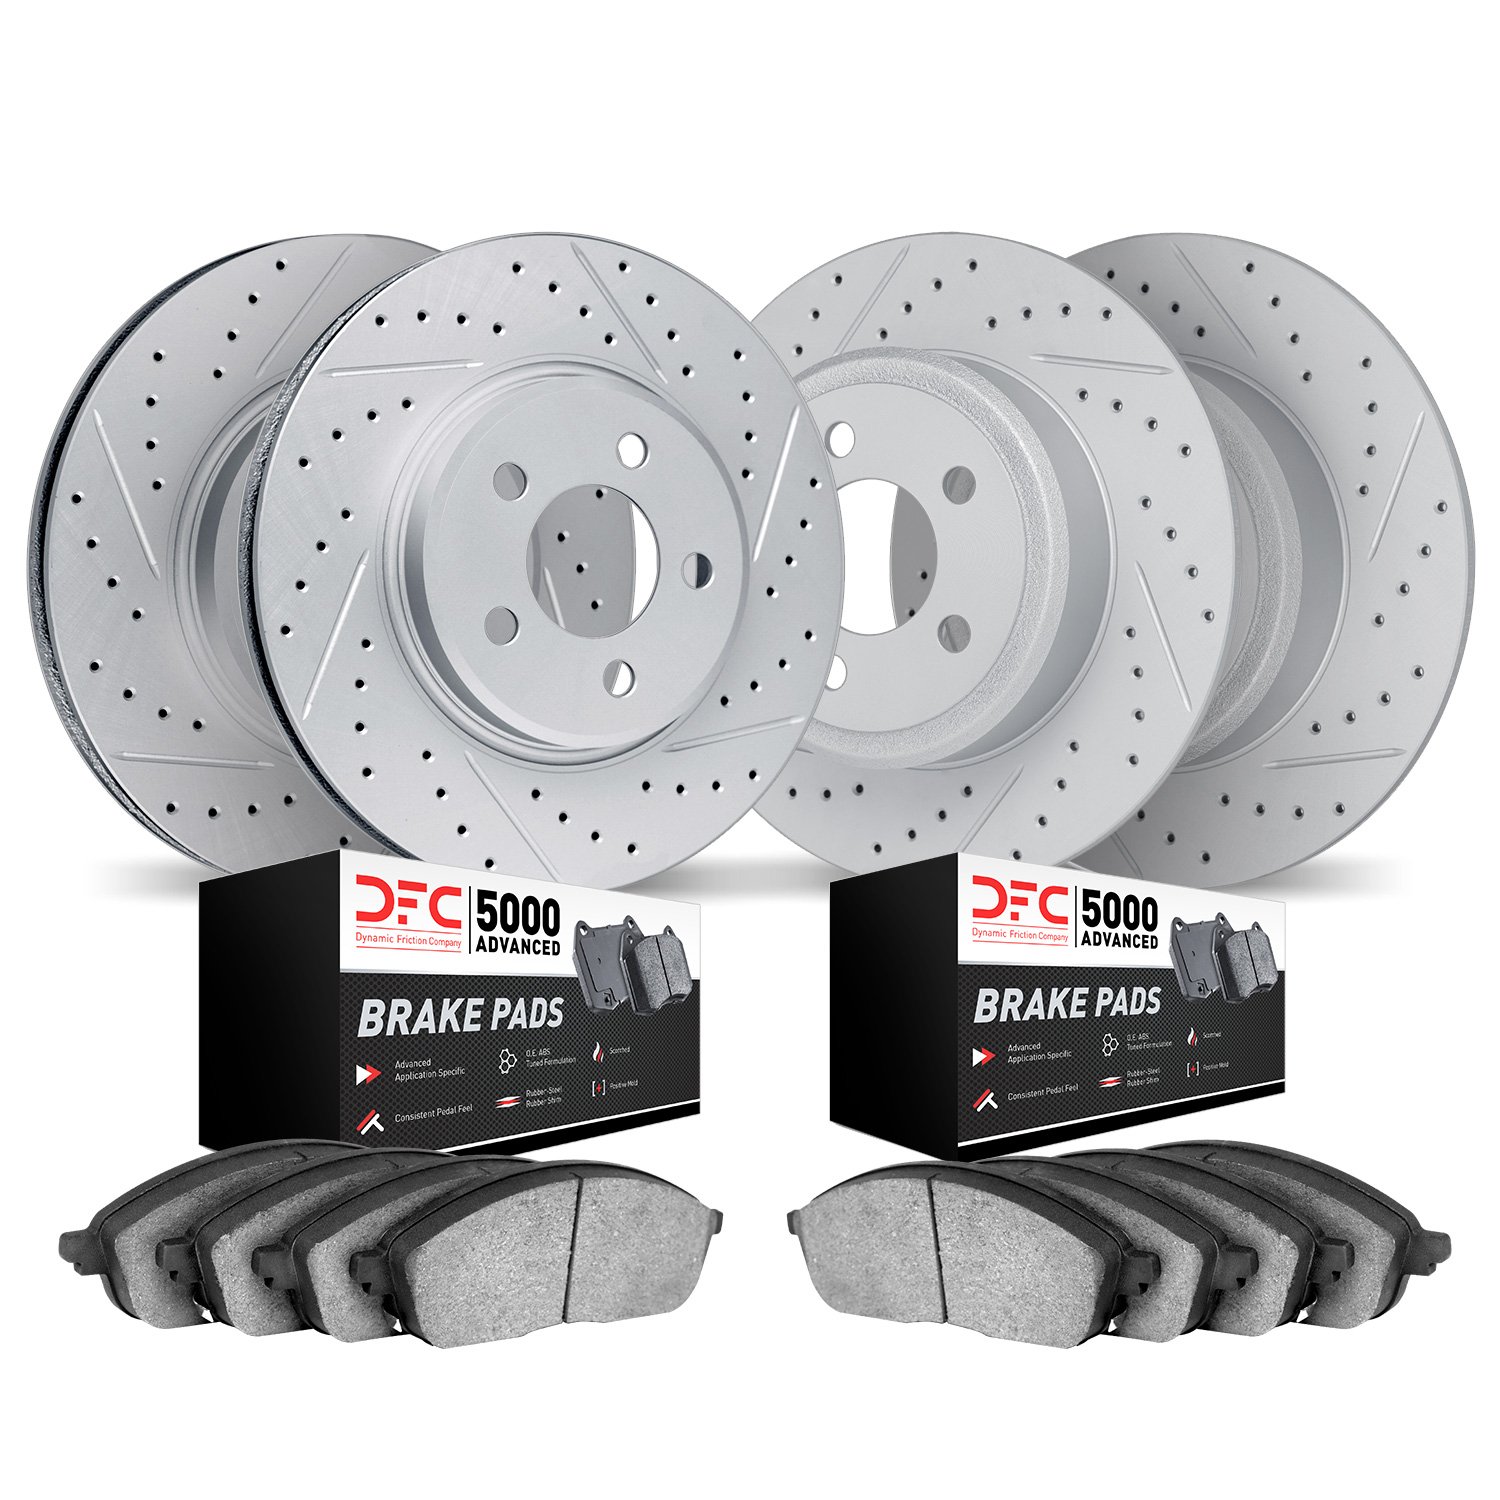 2504-11007 Geoperformance Drilled/Slotted Rotors w/5000 Advanced Brake Pads Kit, 2003-2005 Land Rover, Position: Front and Rear